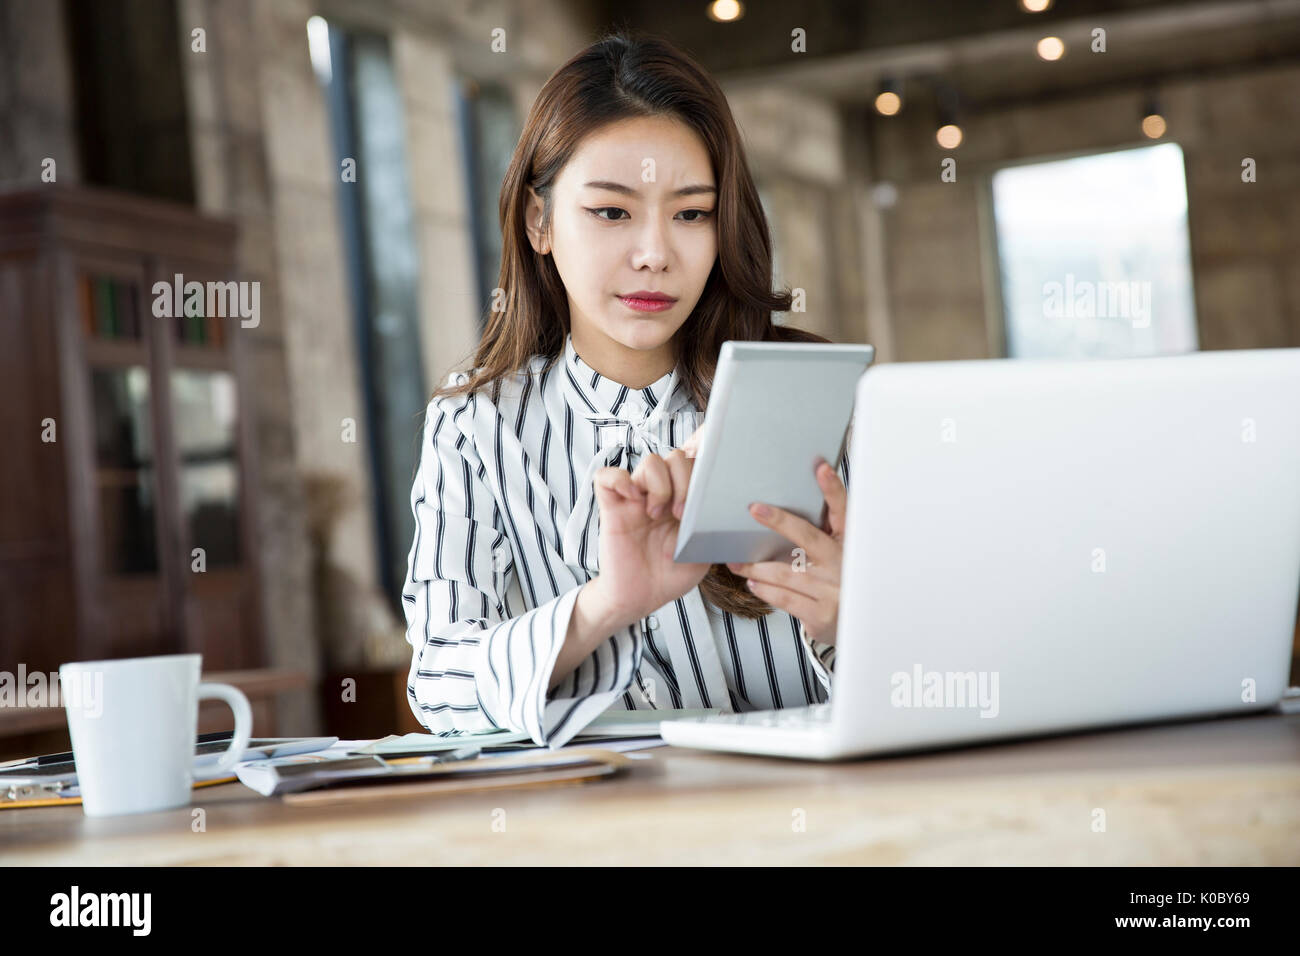 Portrait of young businesswoman using calculator at furniture store Stock Photo